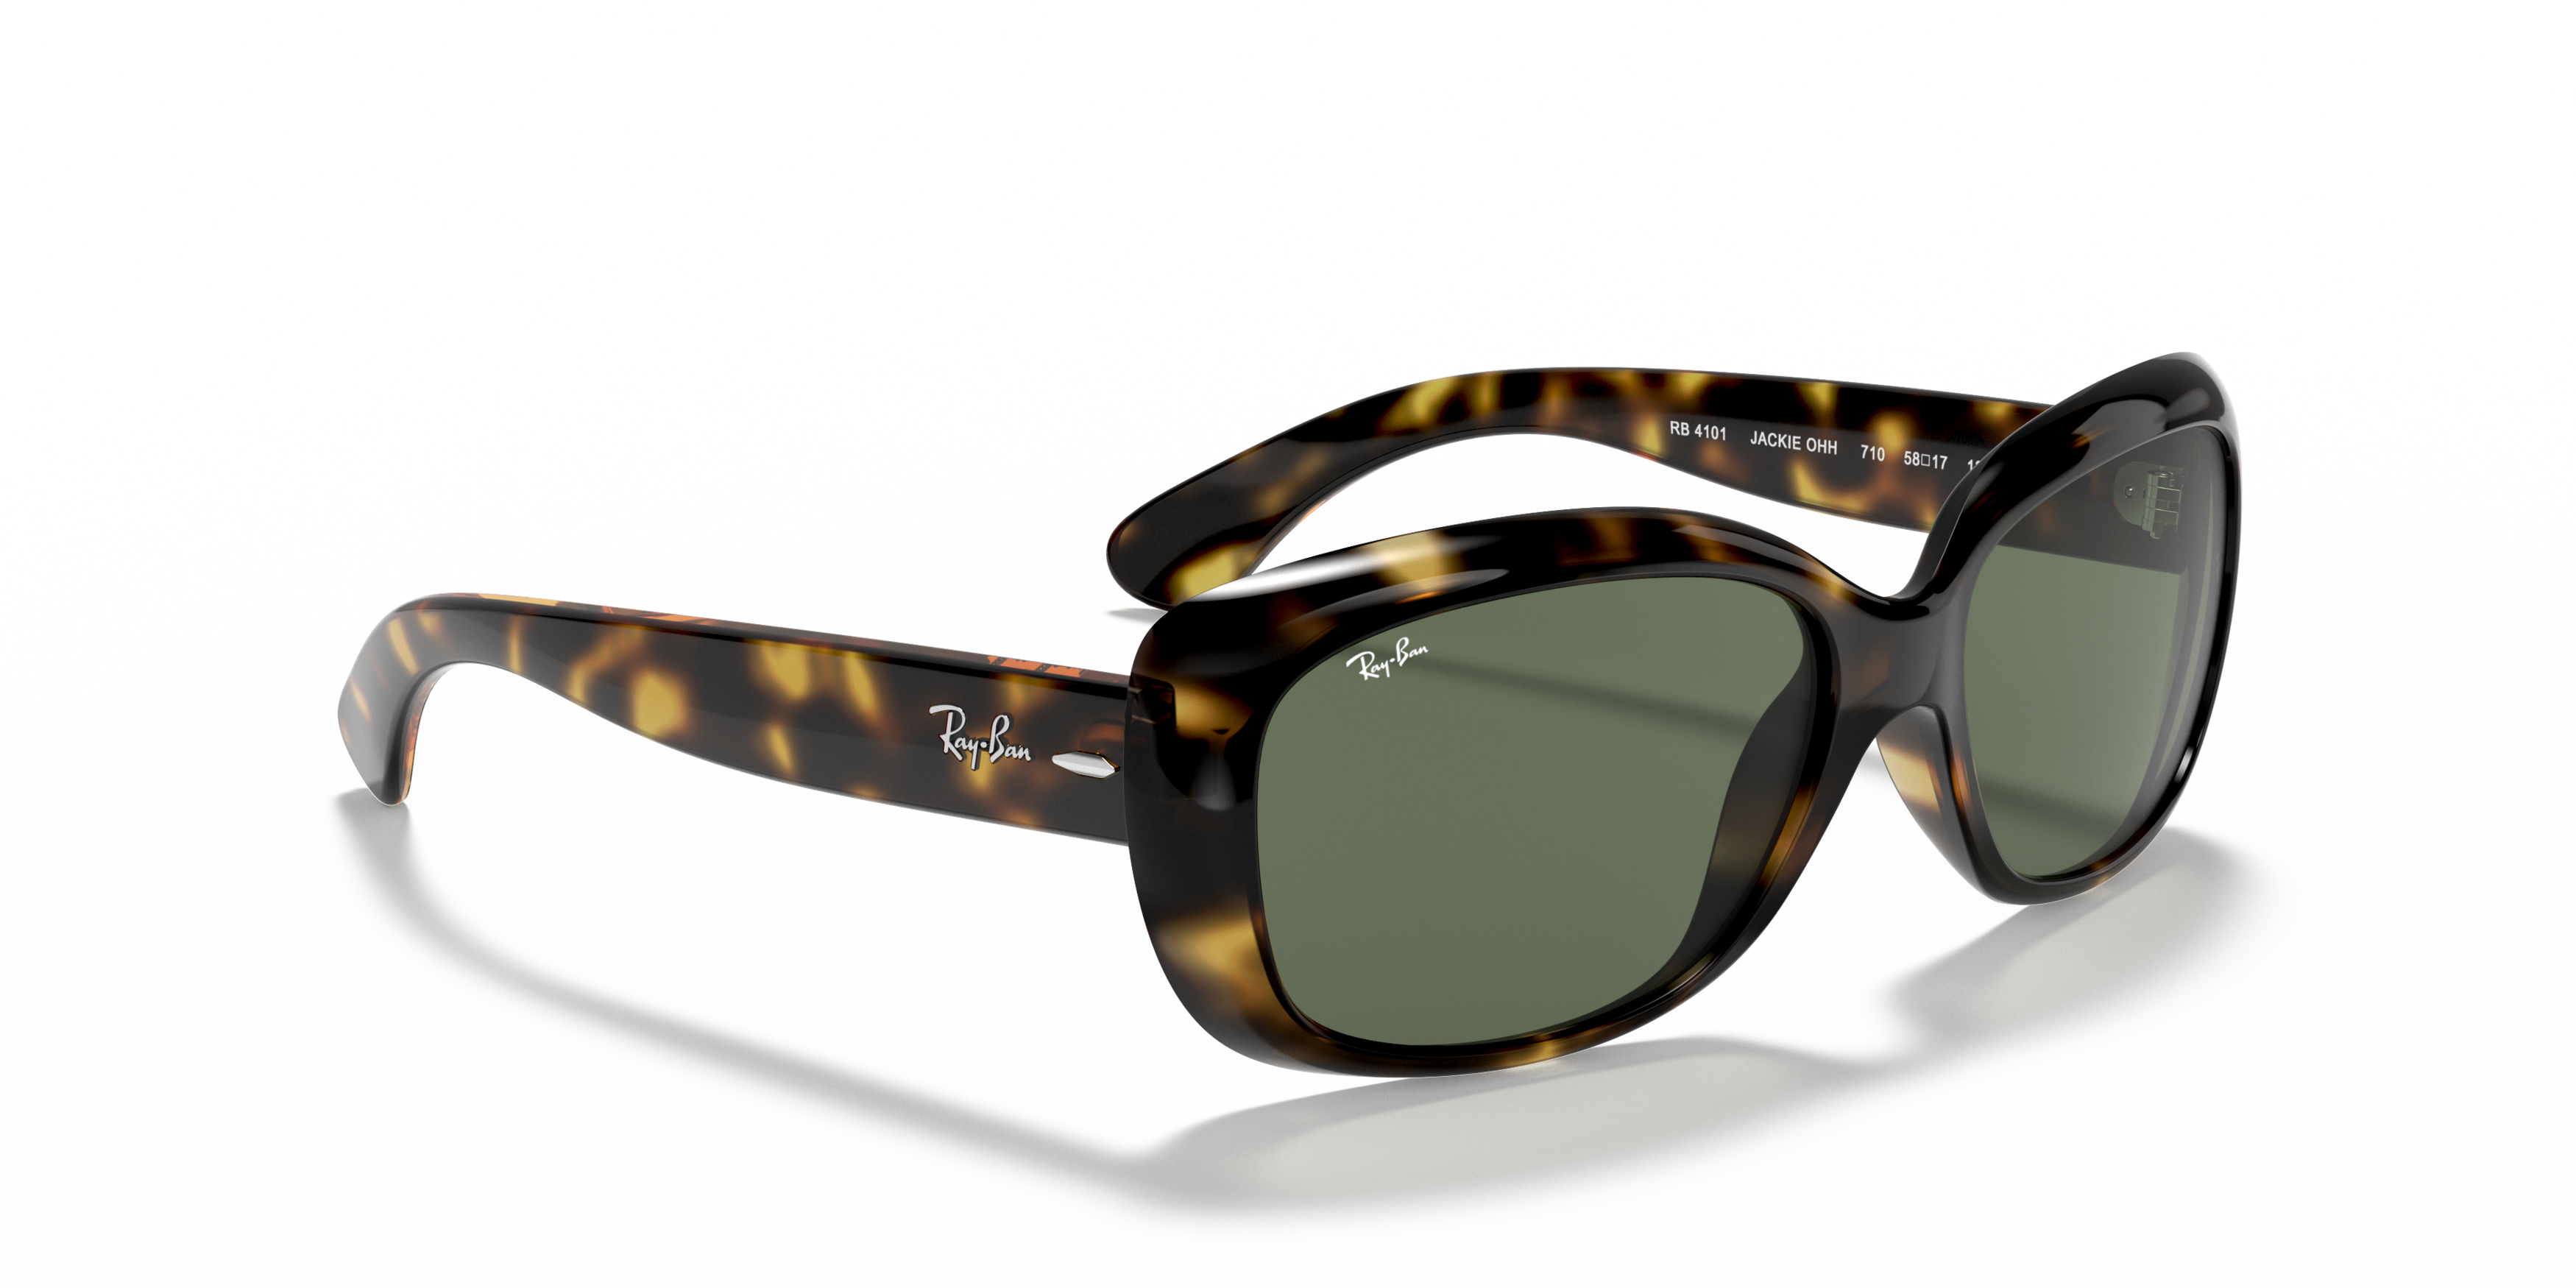 Angle_Right01 Ray-Ban Jackie Ohh RB 4101 (710) Sunglasses Green / Tortoise Shell